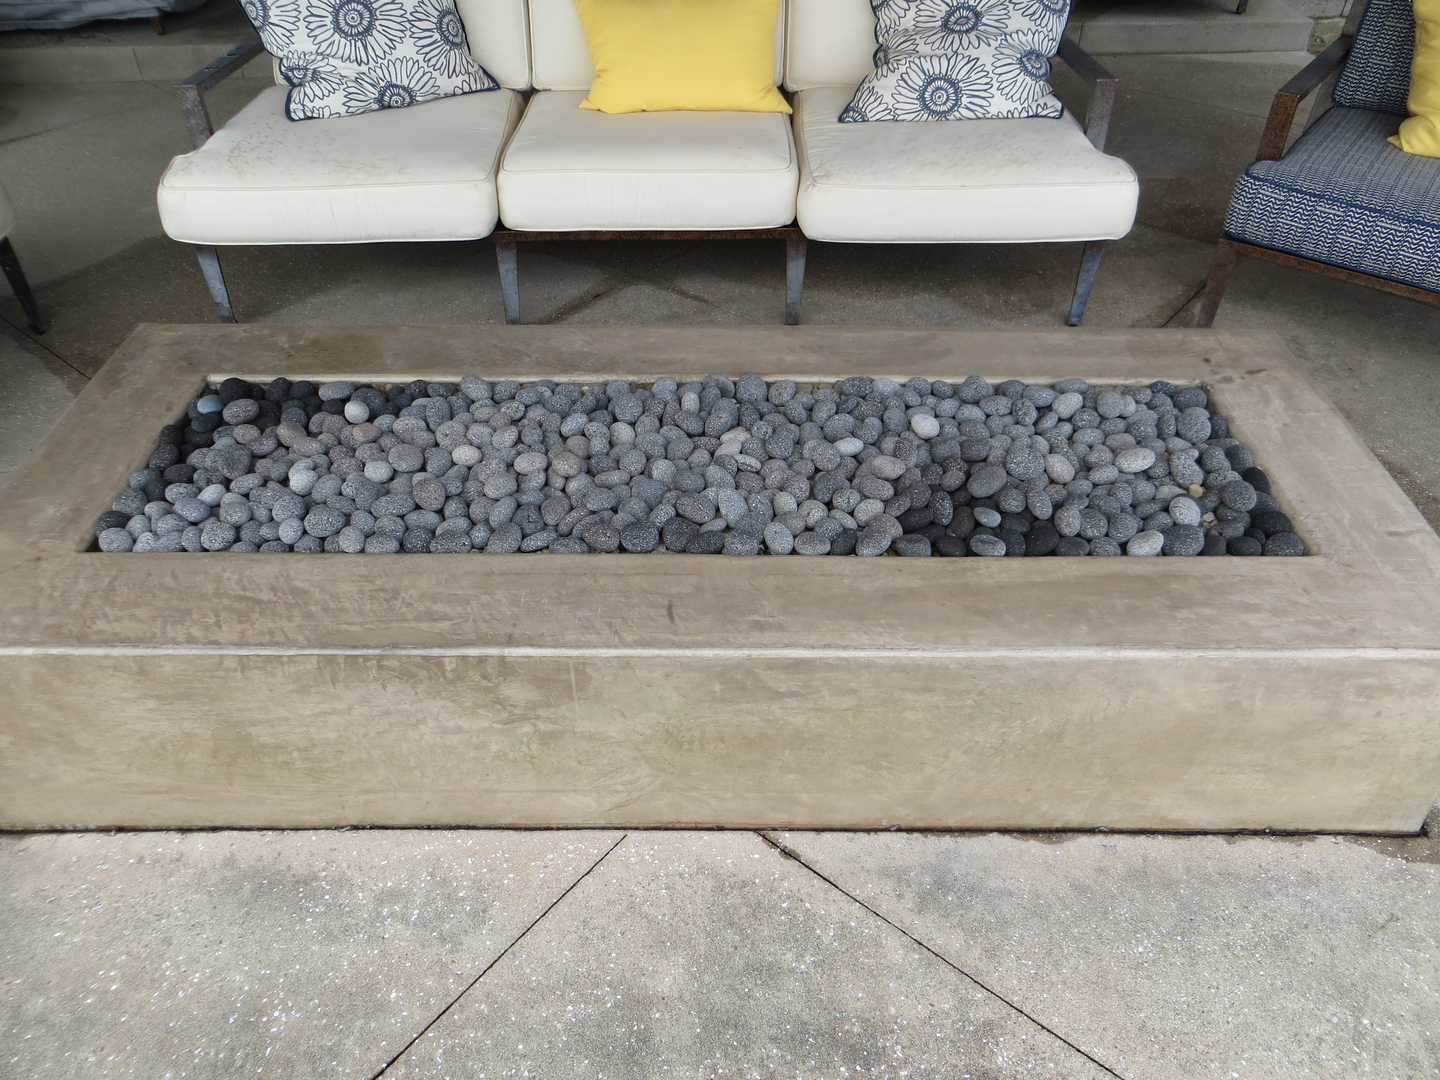 A Granite Fire Space With Grey Pebbles